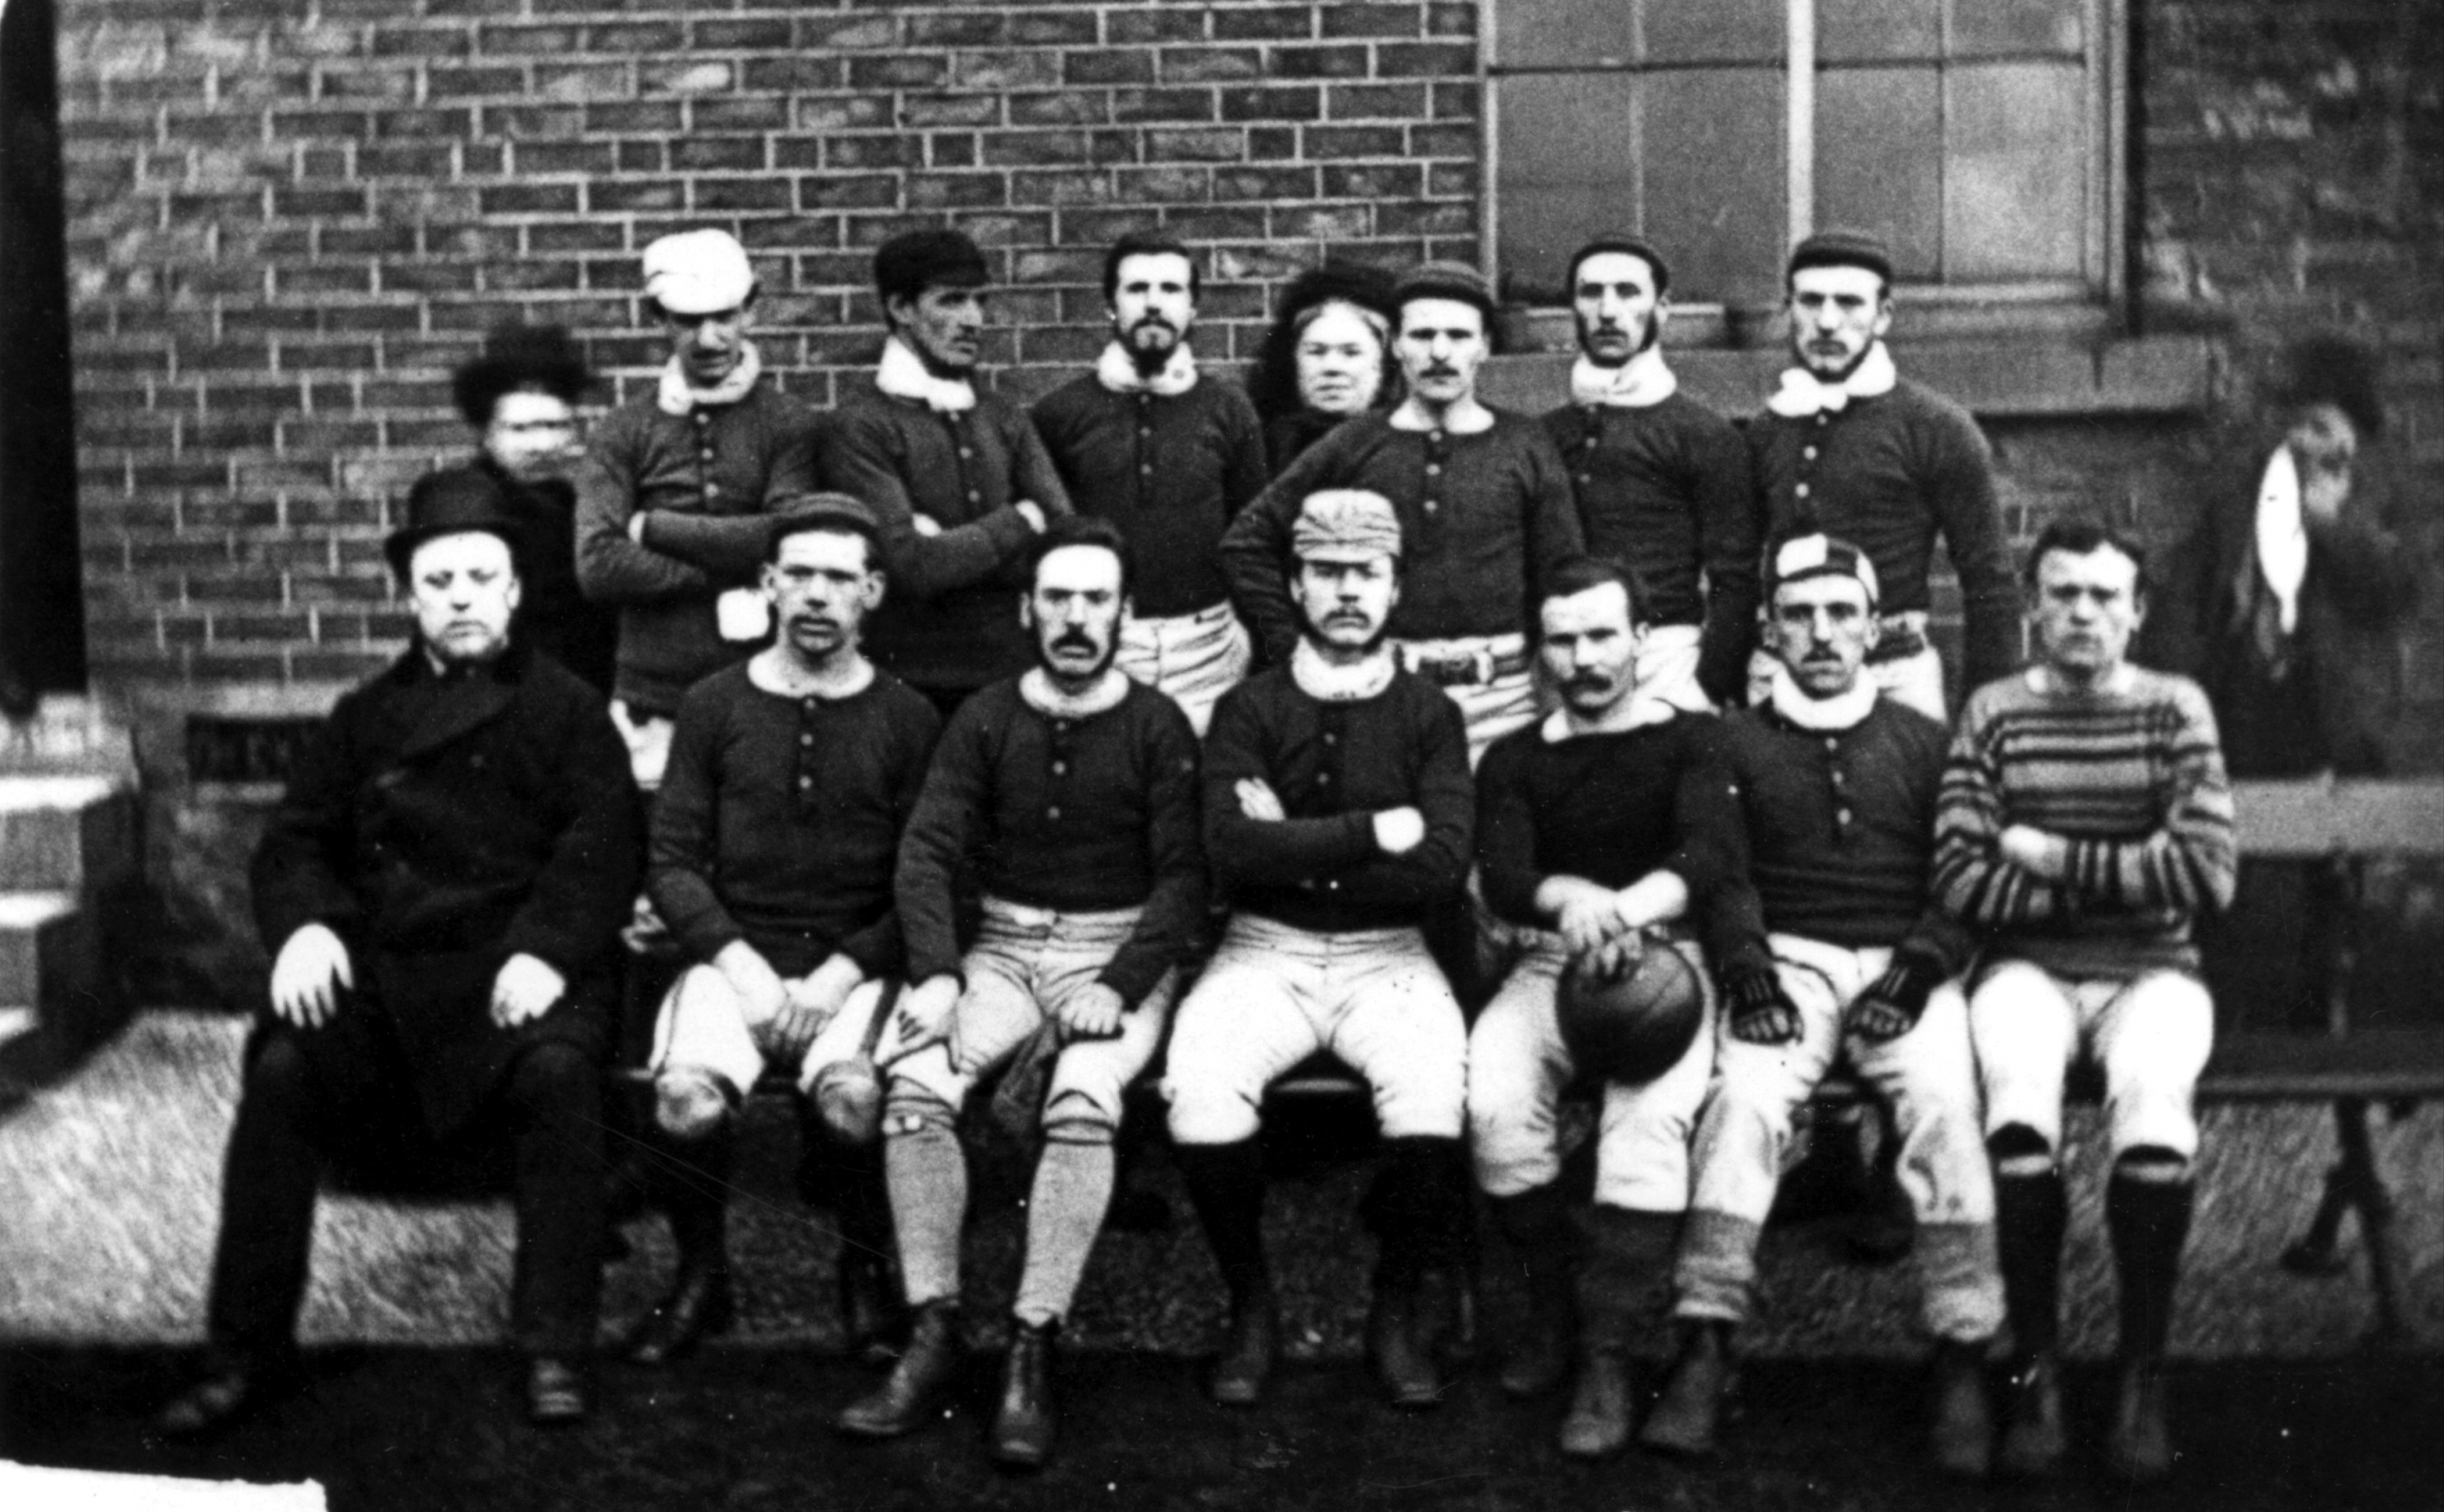 A Sheffield representative football team of 1875. The men are all named in the accompanying caption. But who were the women? - A Sheffield representative football team of 1875. The men are all named in the accompanying caption. But who were the women?